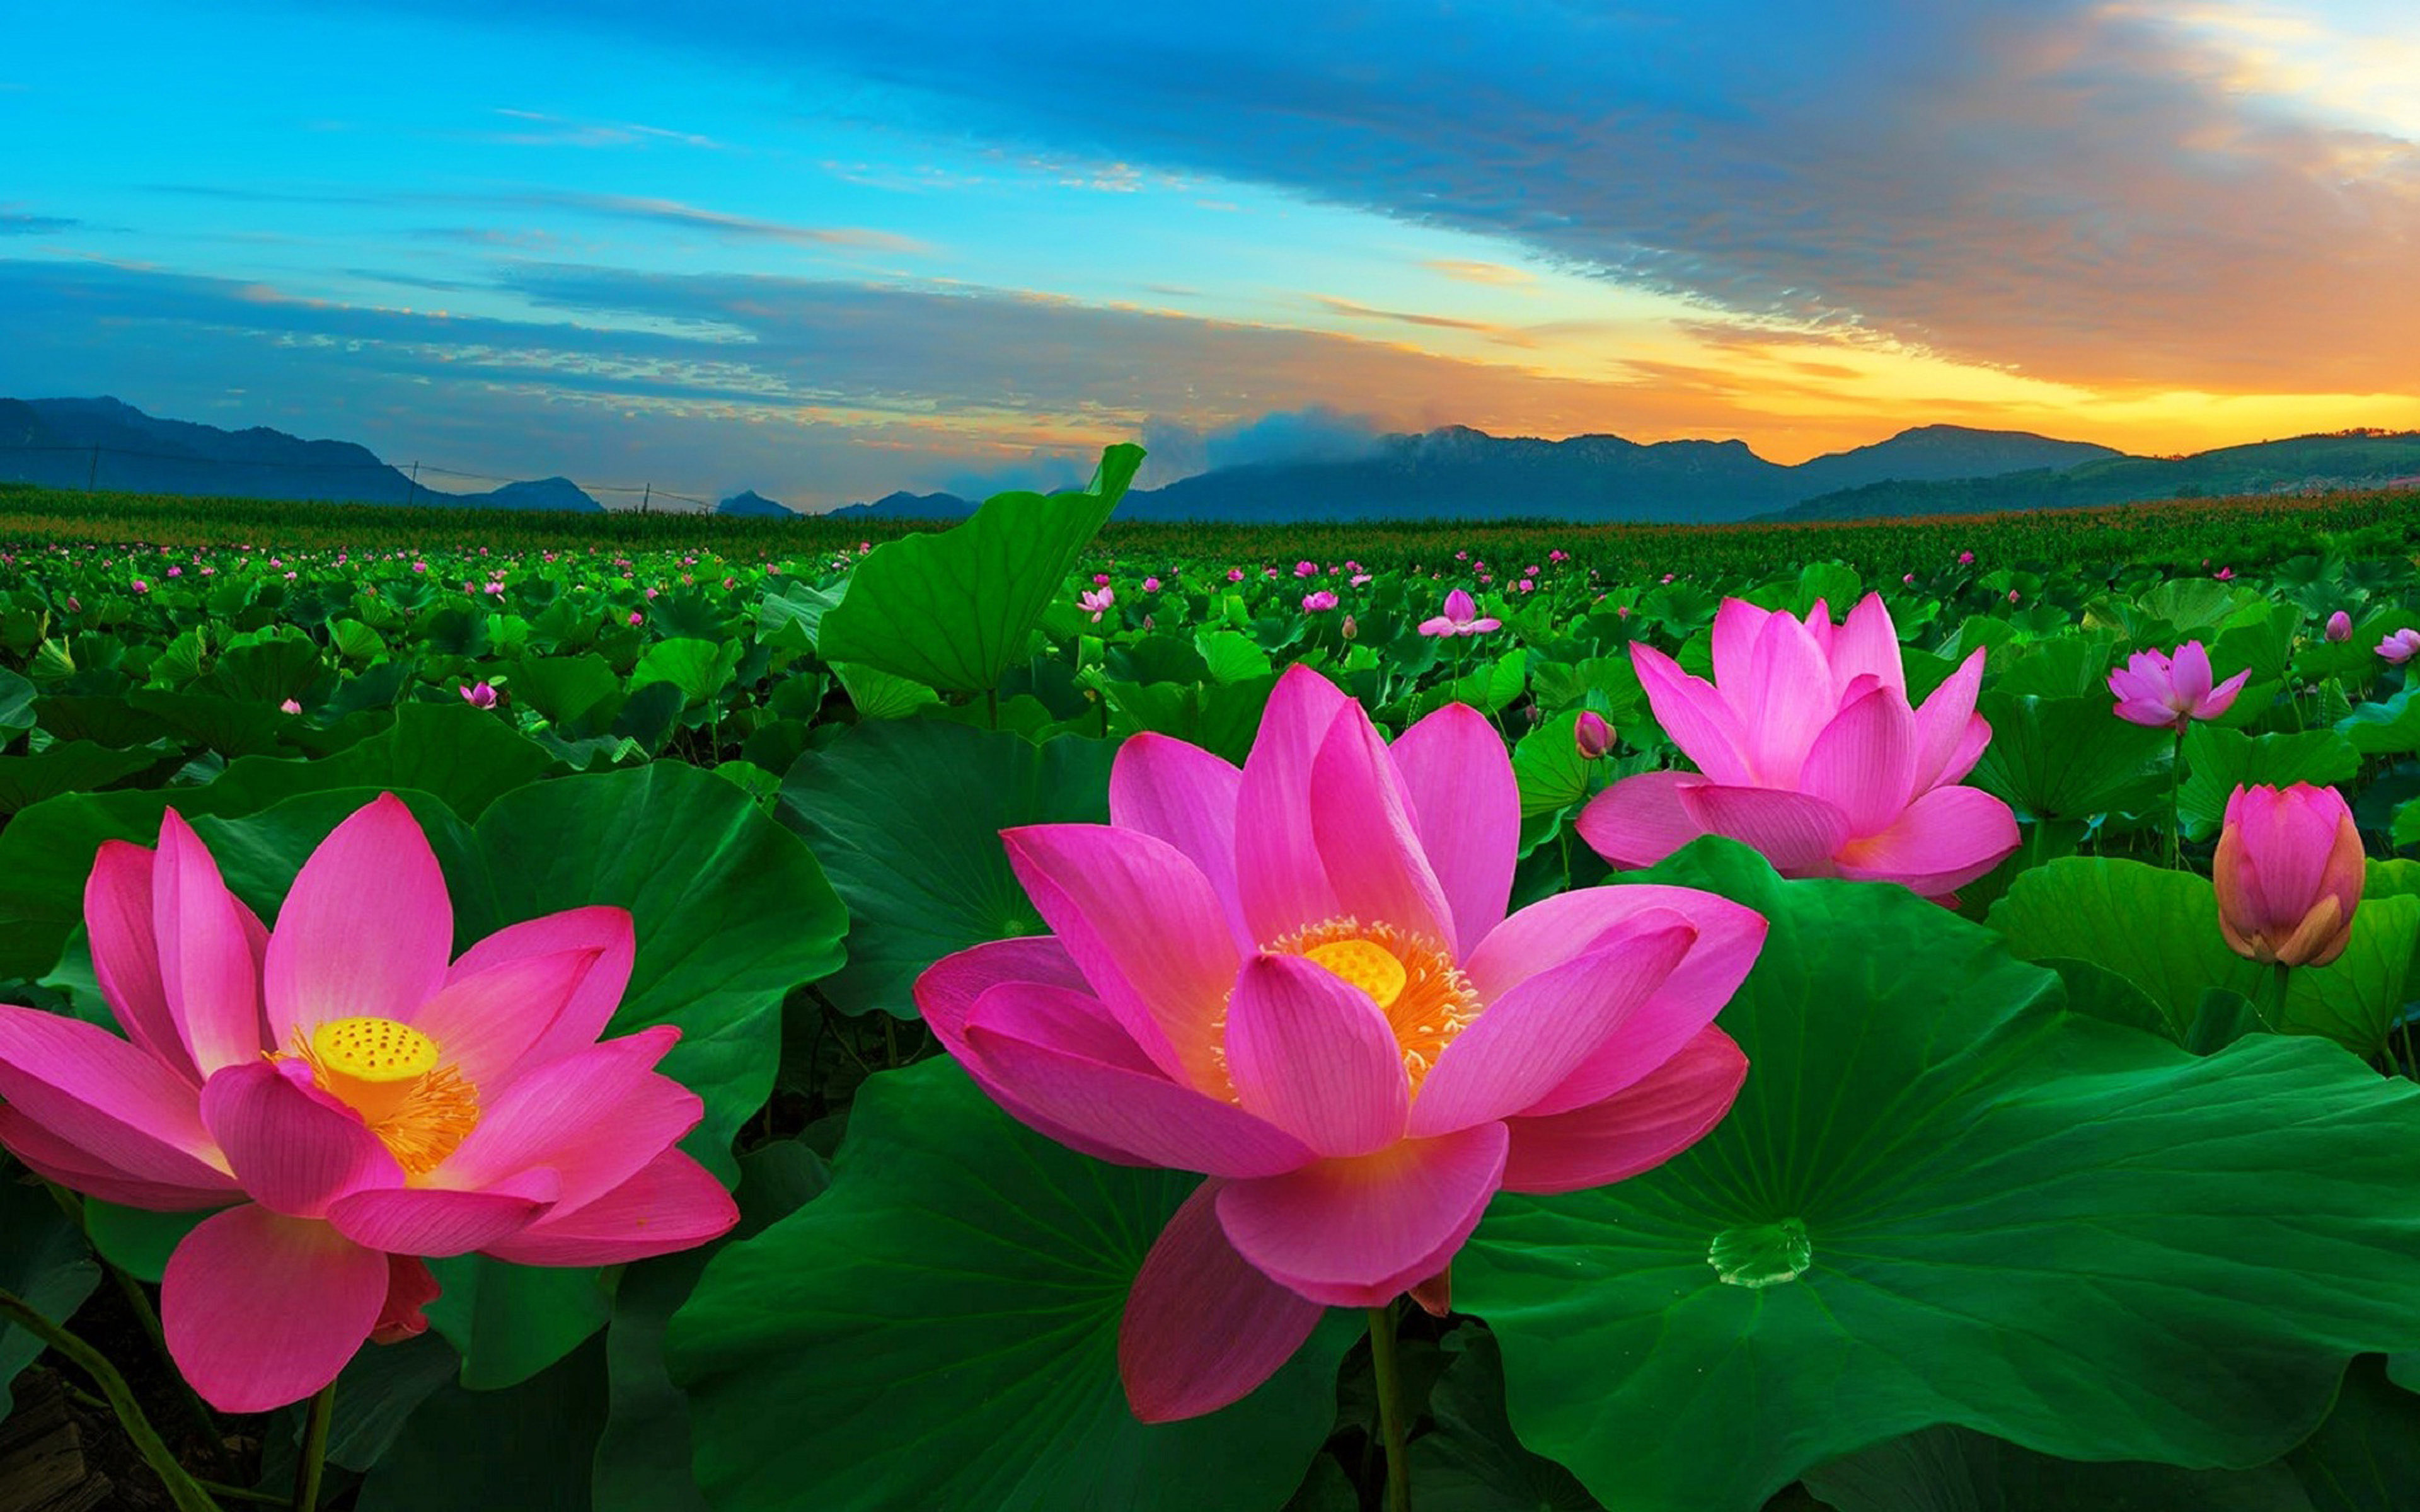 Lotus Flower Photos Download The BEST Free Lotus Flower Stock Photos  HD  Images